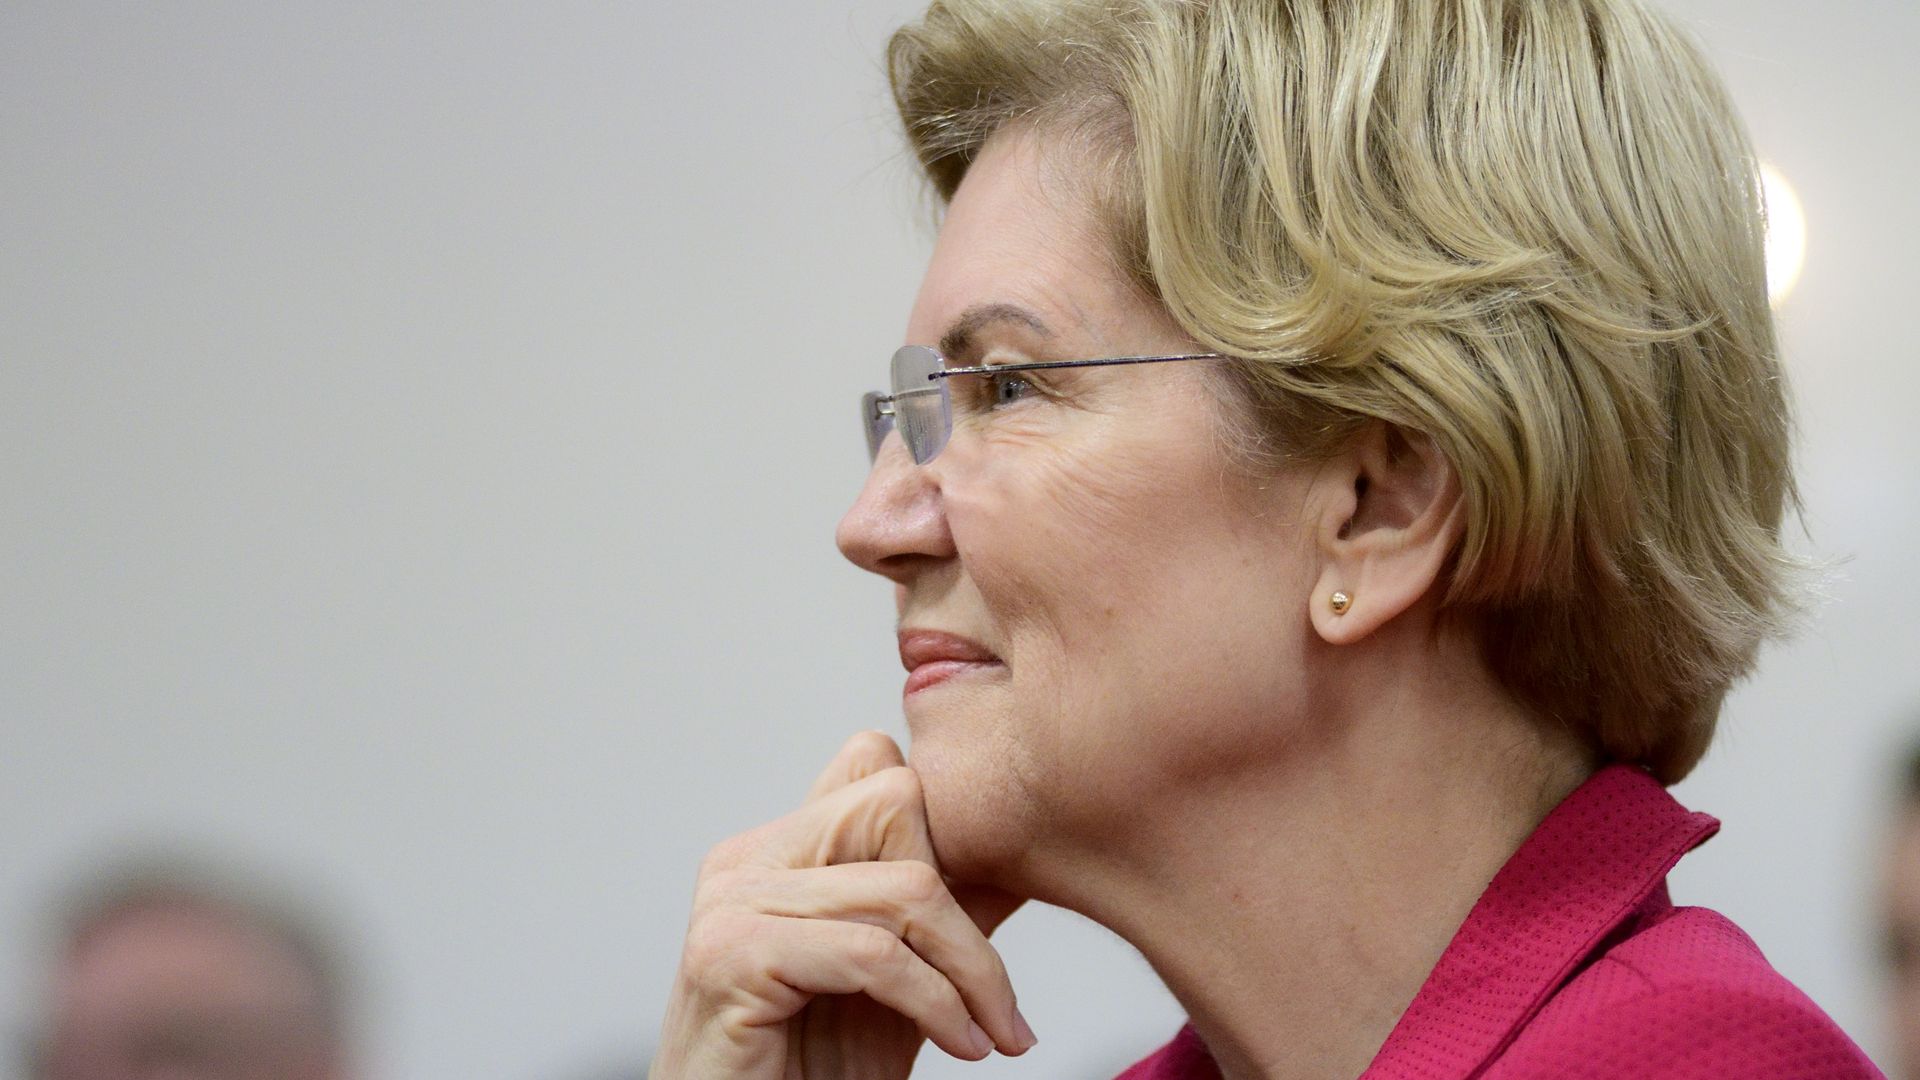 Warren smiling while touching her hand to her face. She is wearing a pink blazer-looking jacket and glasses. 